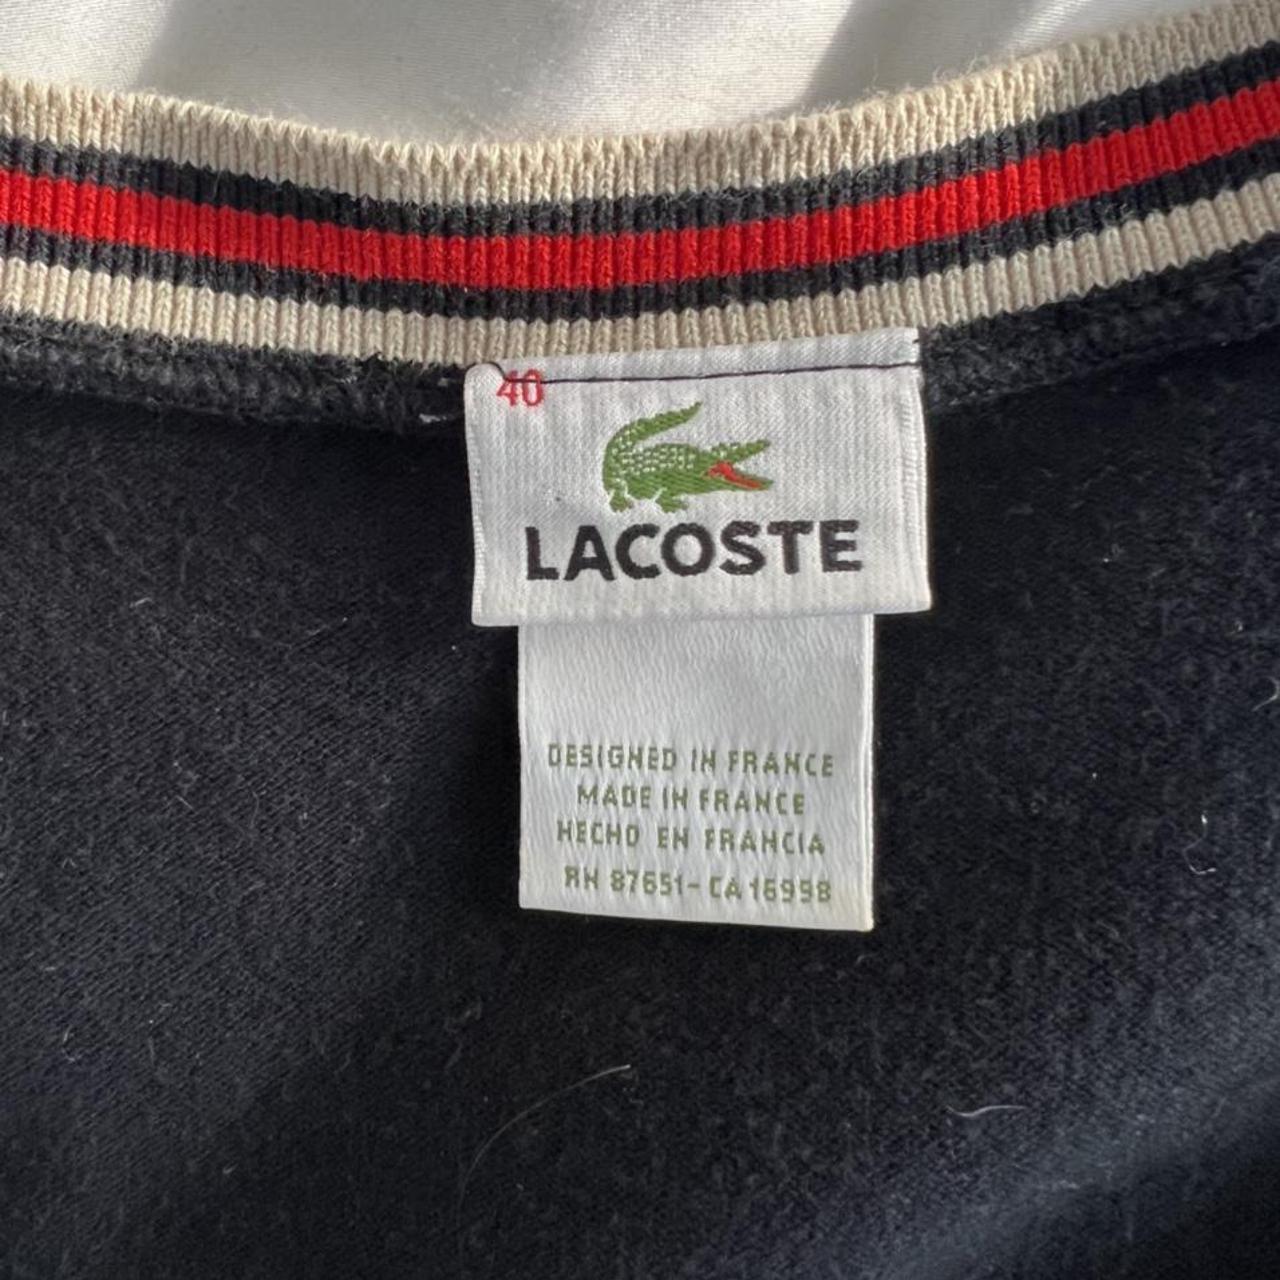 Gorgeous black LACOSTE sweater vest with red and... - Depop